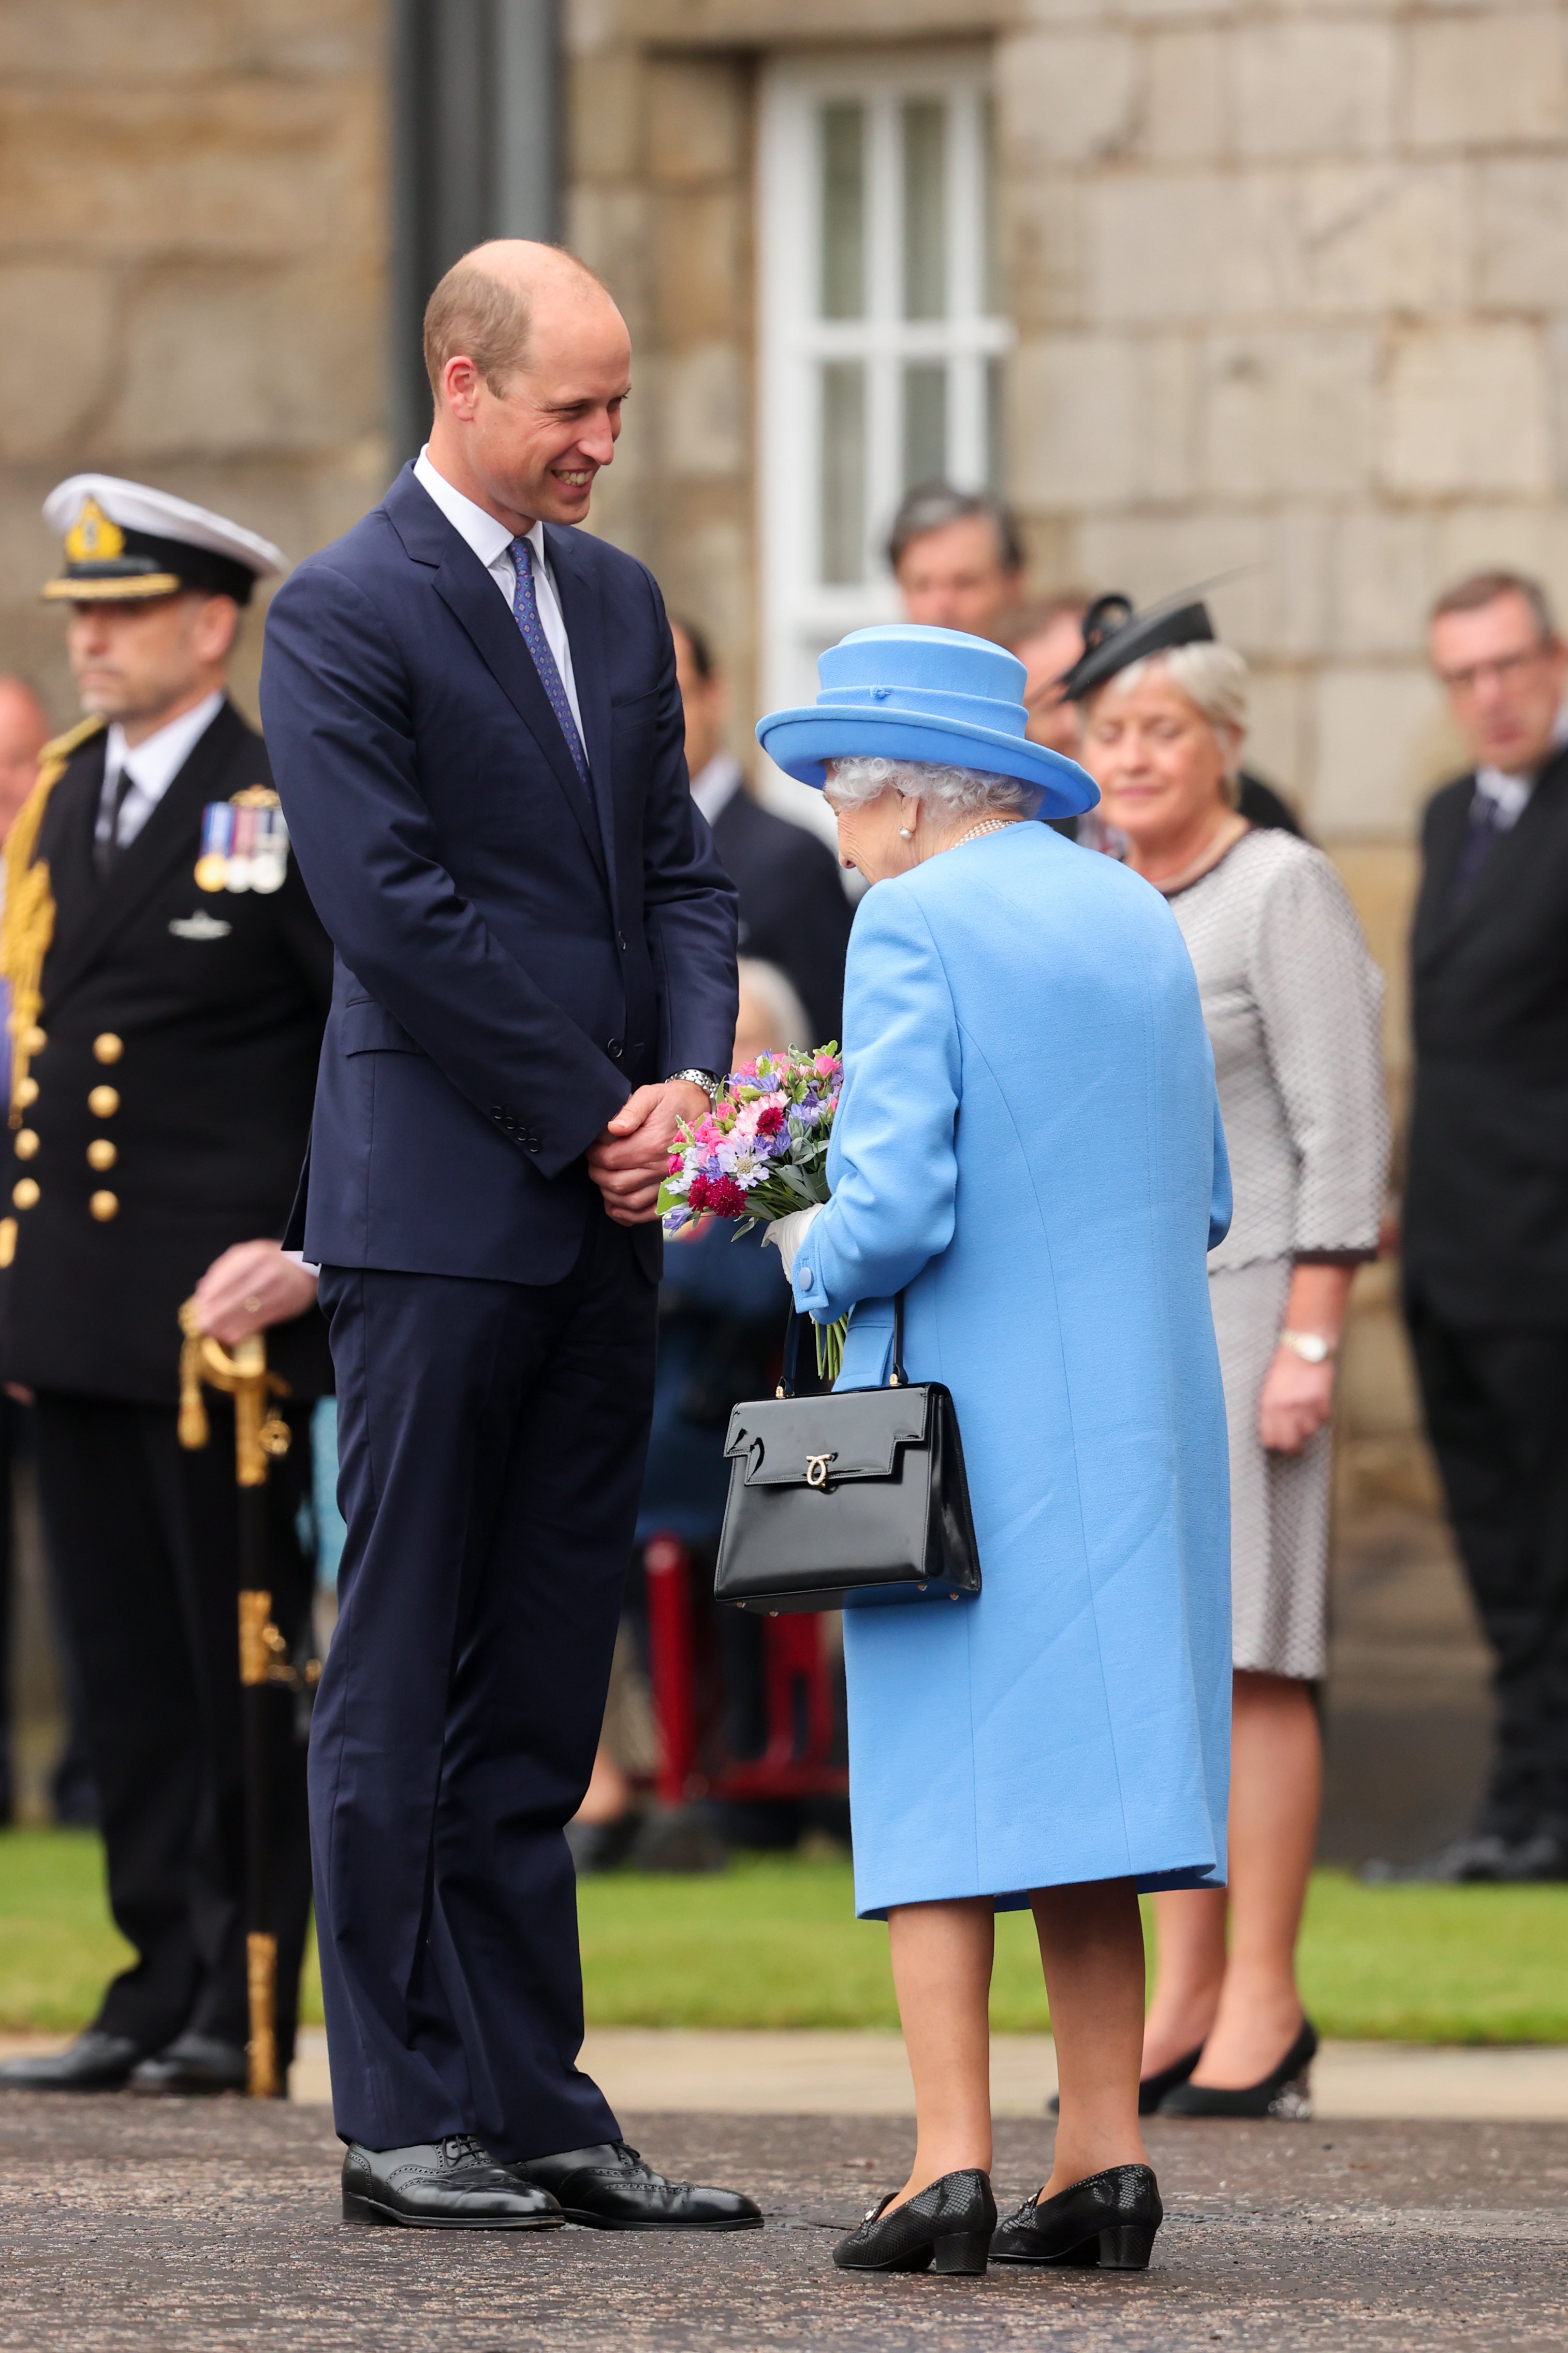 Prince William and Queen Elizabeth attend The Palace of Holyrood house on June 28, 2021, in Edinburgh, Scotland. | Source: Getty Images.